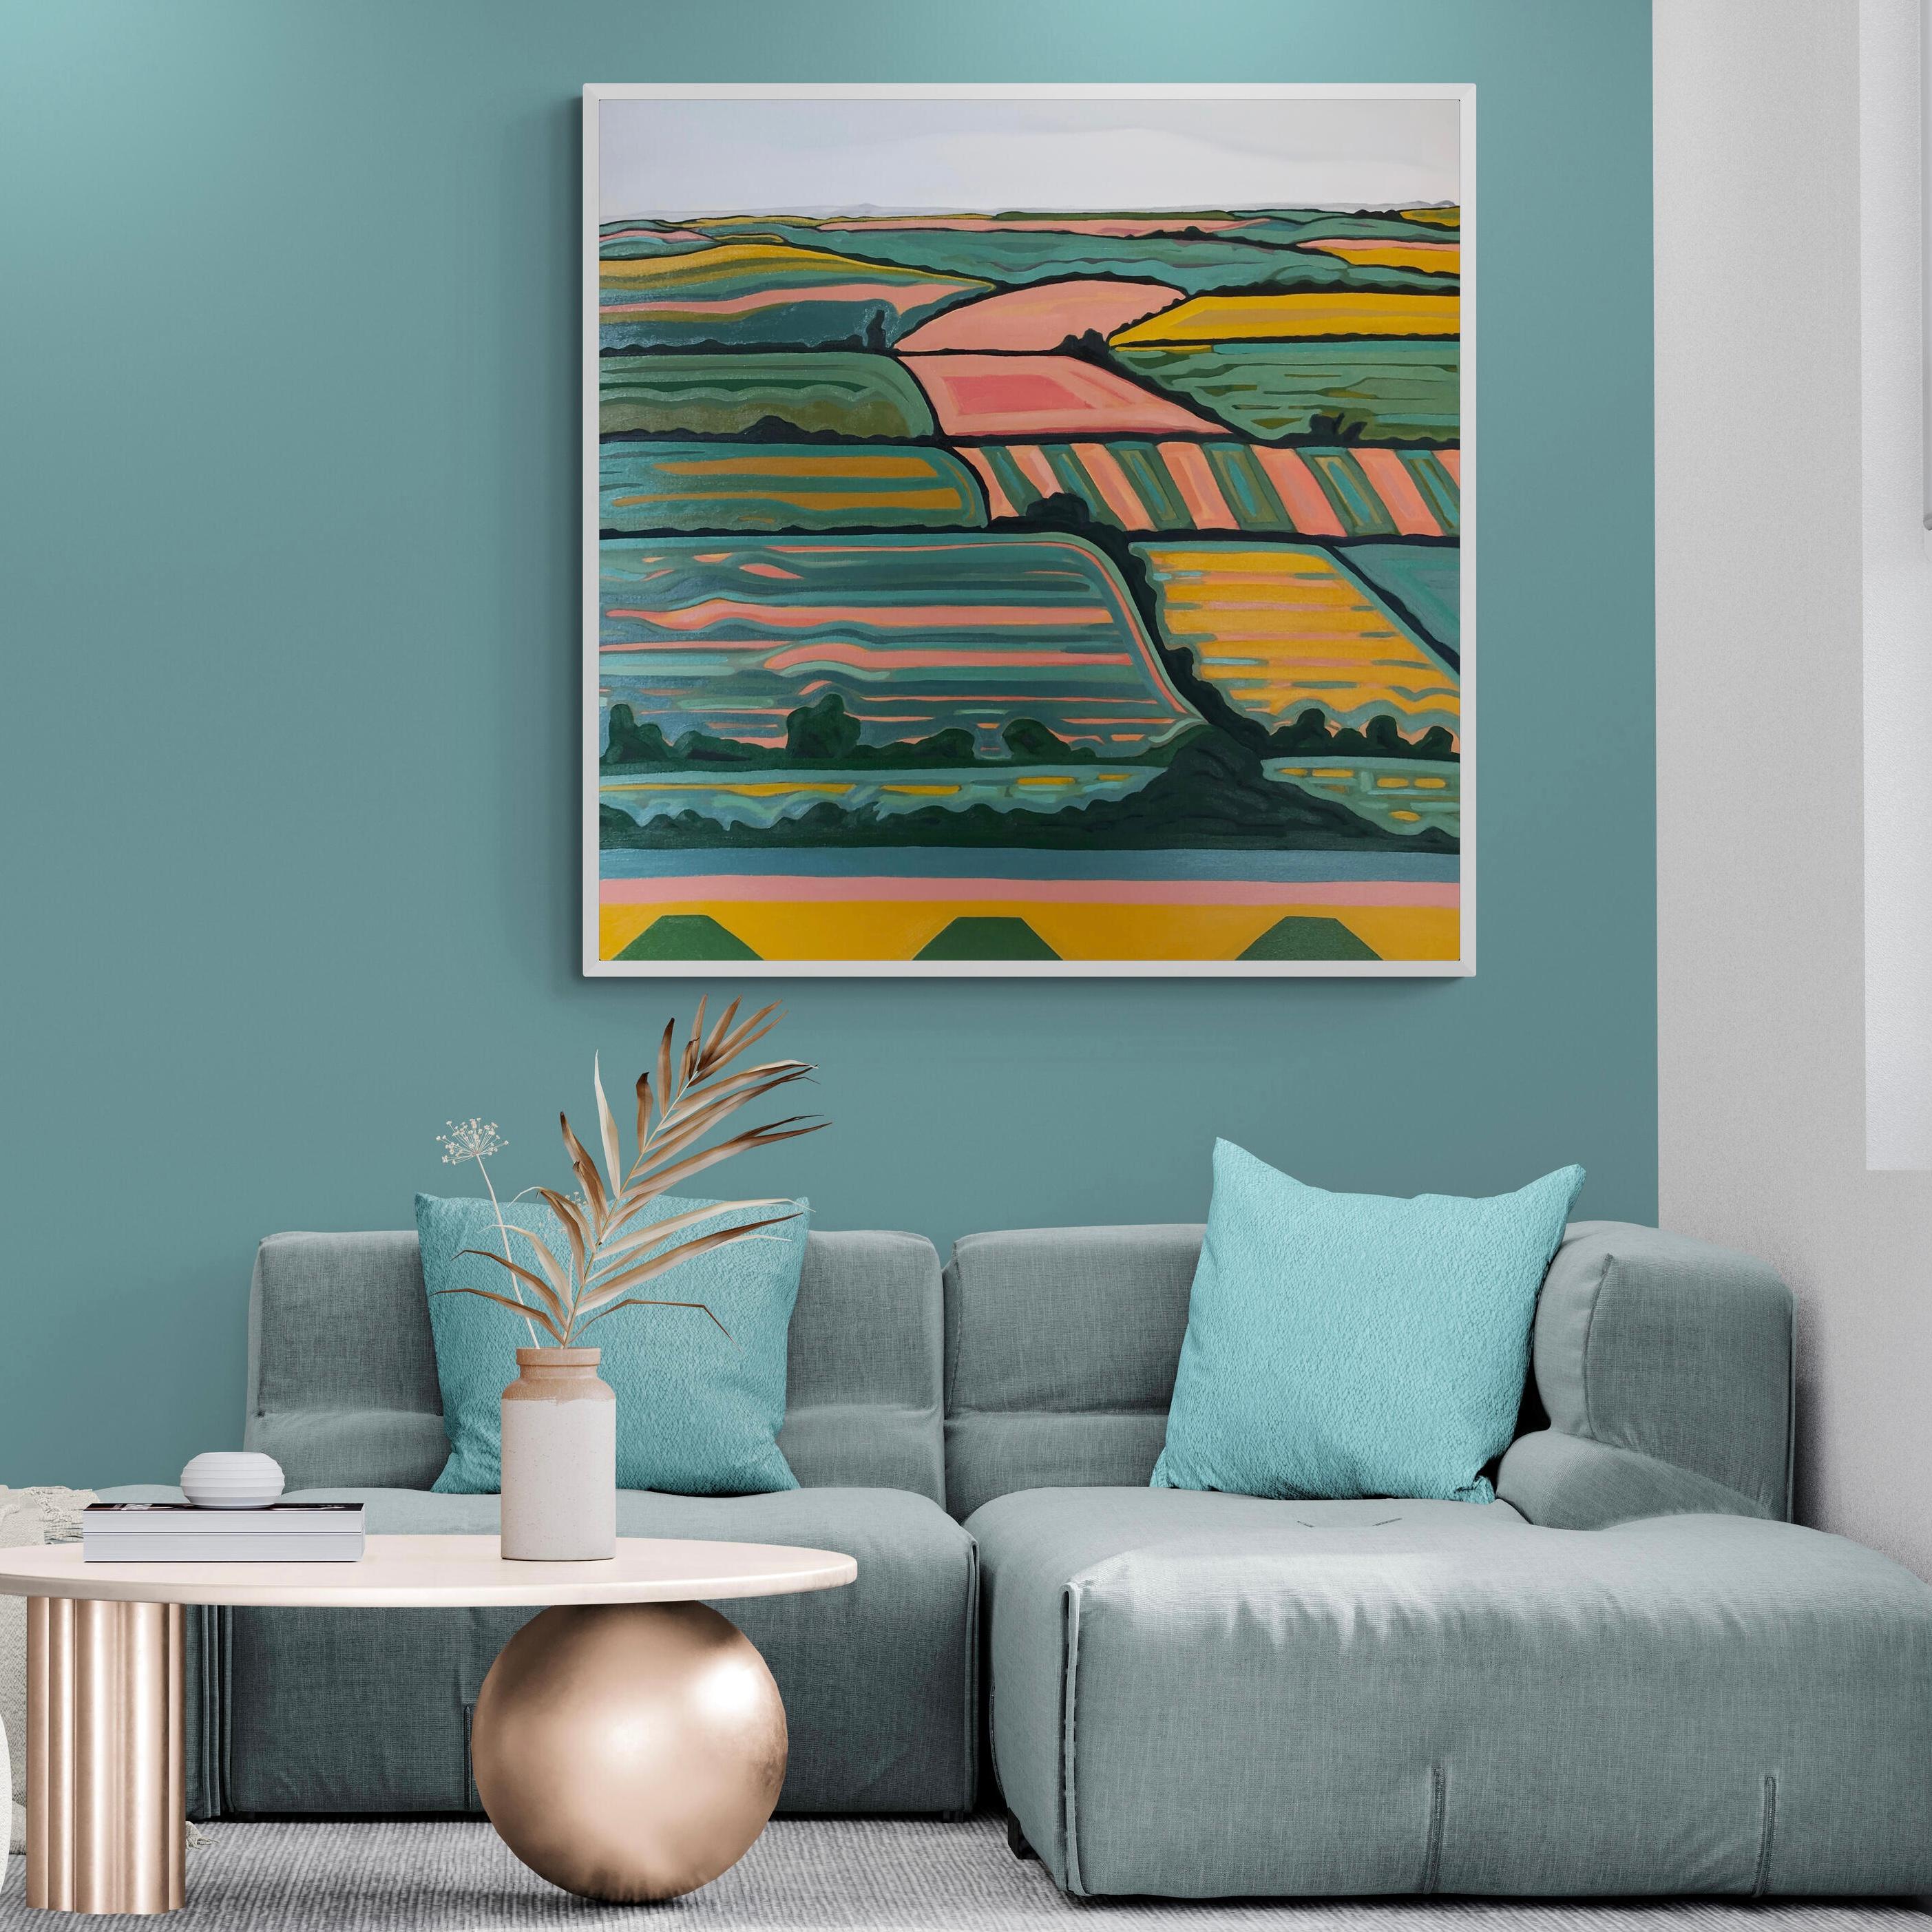 Hill View no. 1 is an original painting by artist Alexa Roscoe. Alexa captures a colourful landscape with strong lines which cascade down the canvas giving a sense of movement and flow. In contrast to the foreground where Alexa has abstracted the